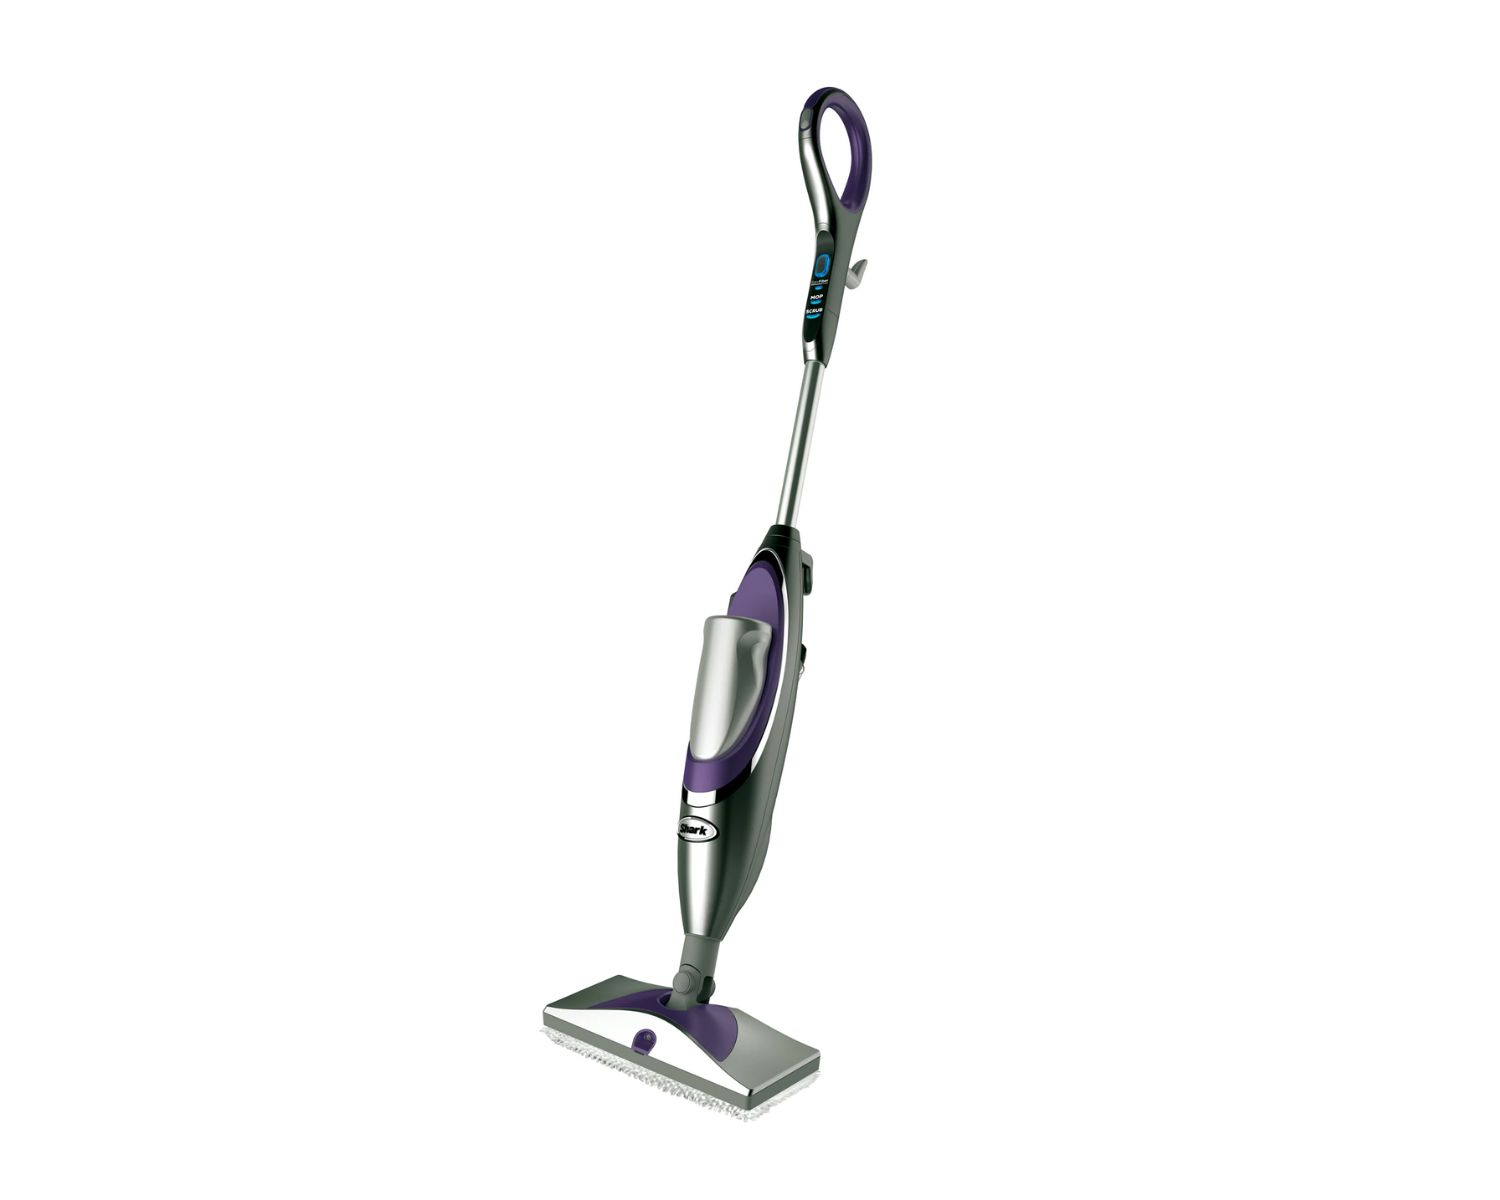 How To Turn On Shark Steam Mop